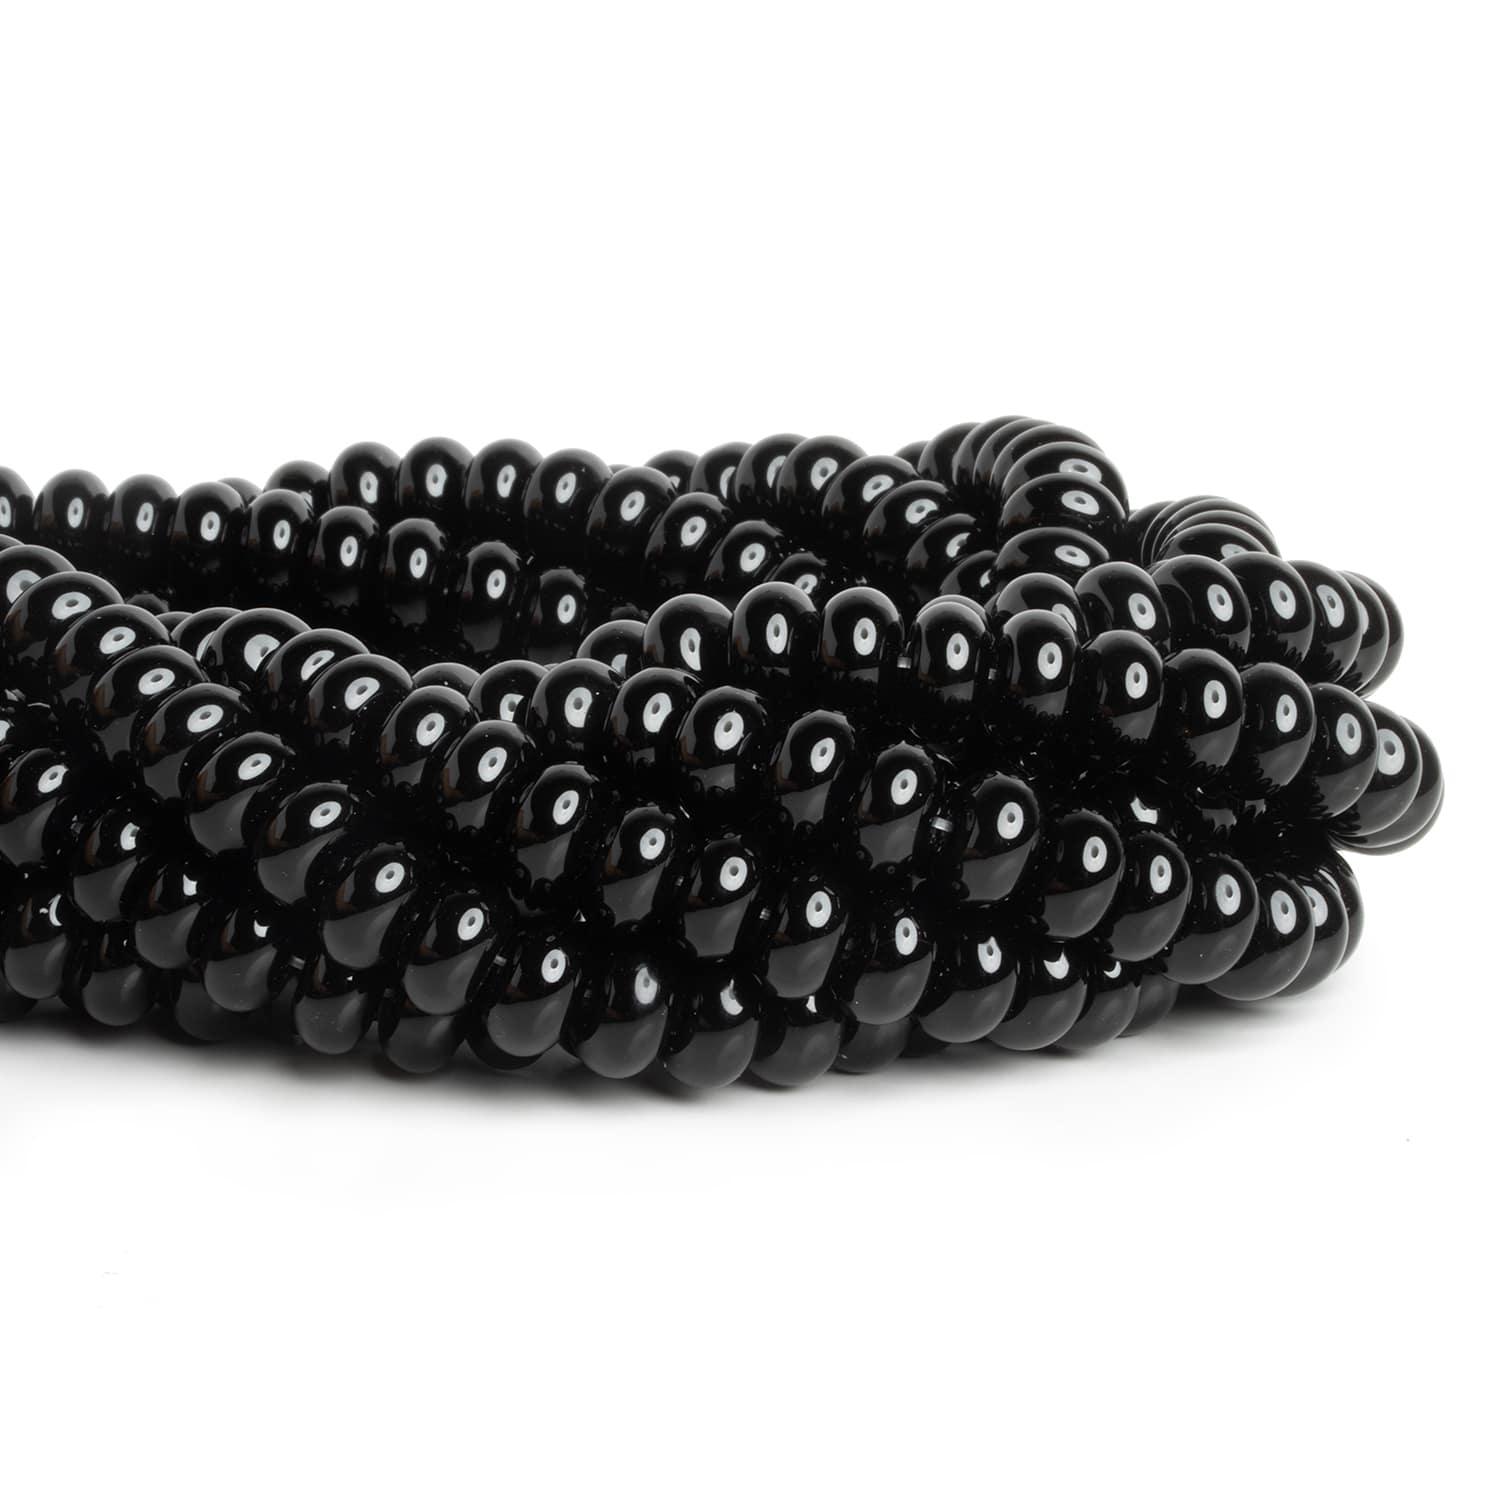 Buy 10mm Matte Hematite faceted round beads 15.5 inch 43 pieces Online